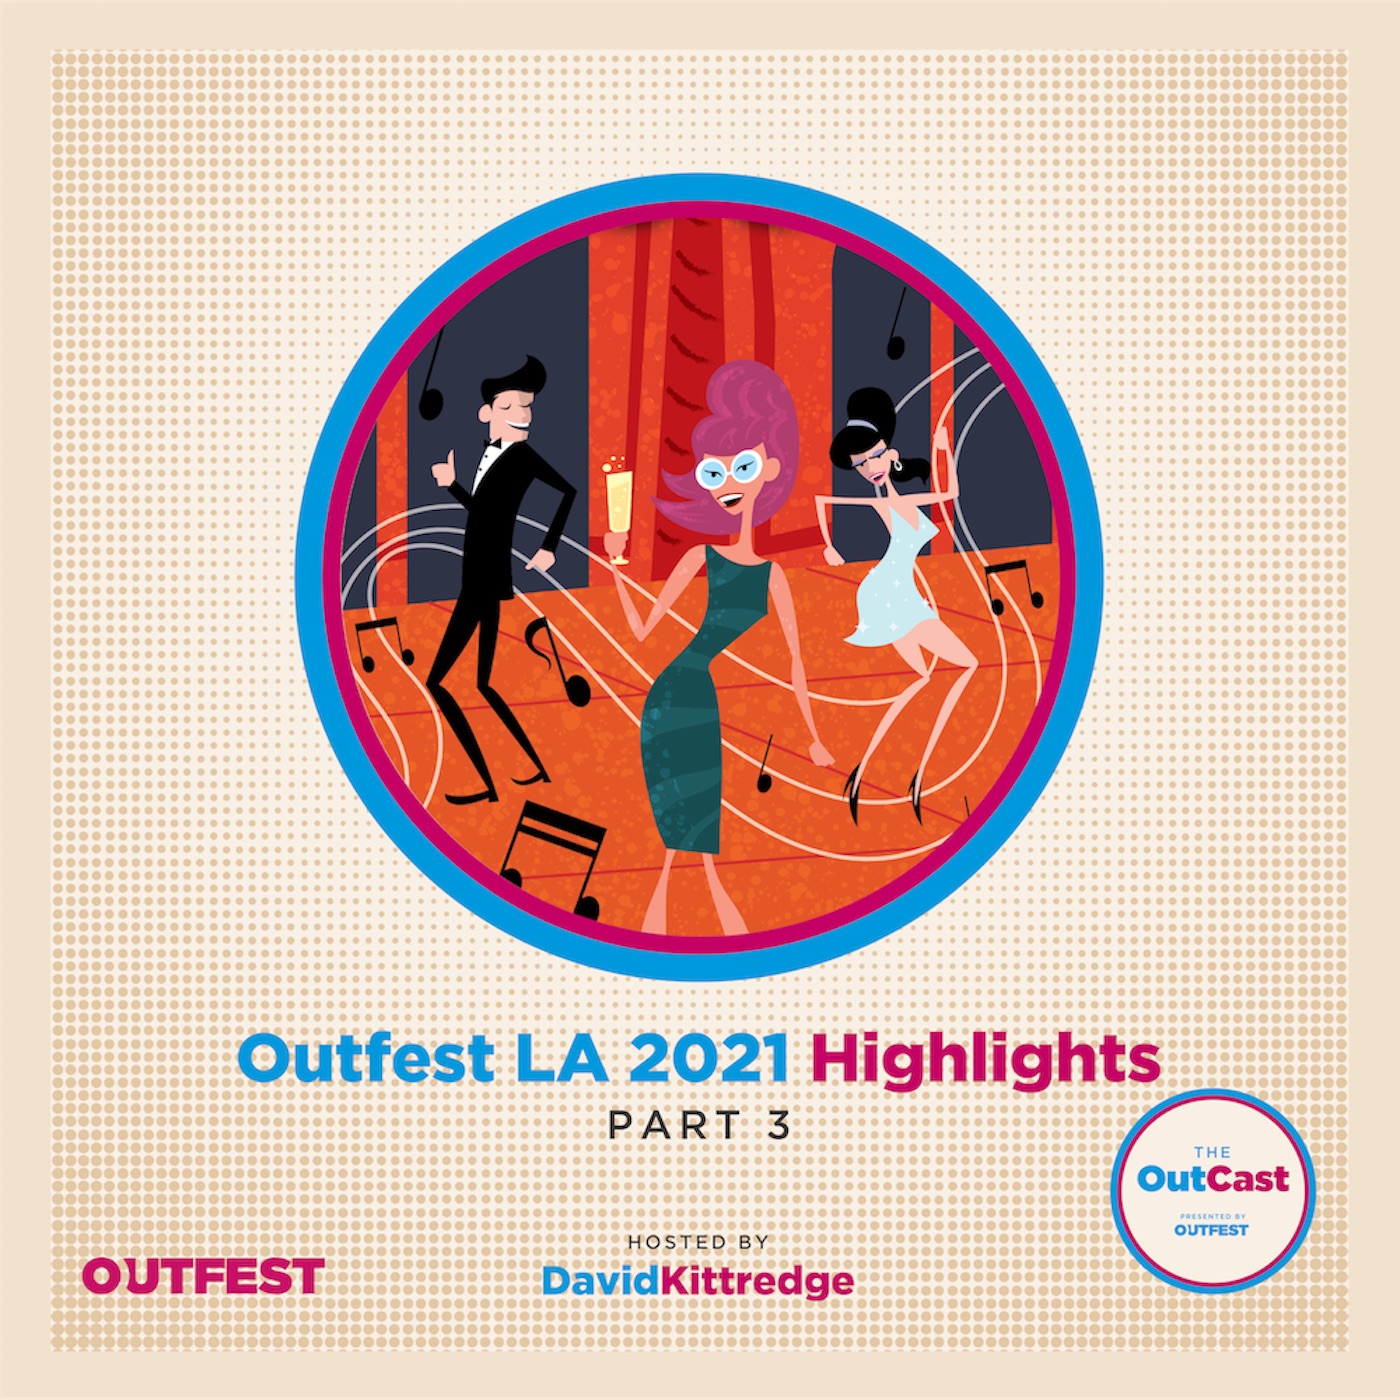 Artwork for podcast The OutCast Presented by Outfest